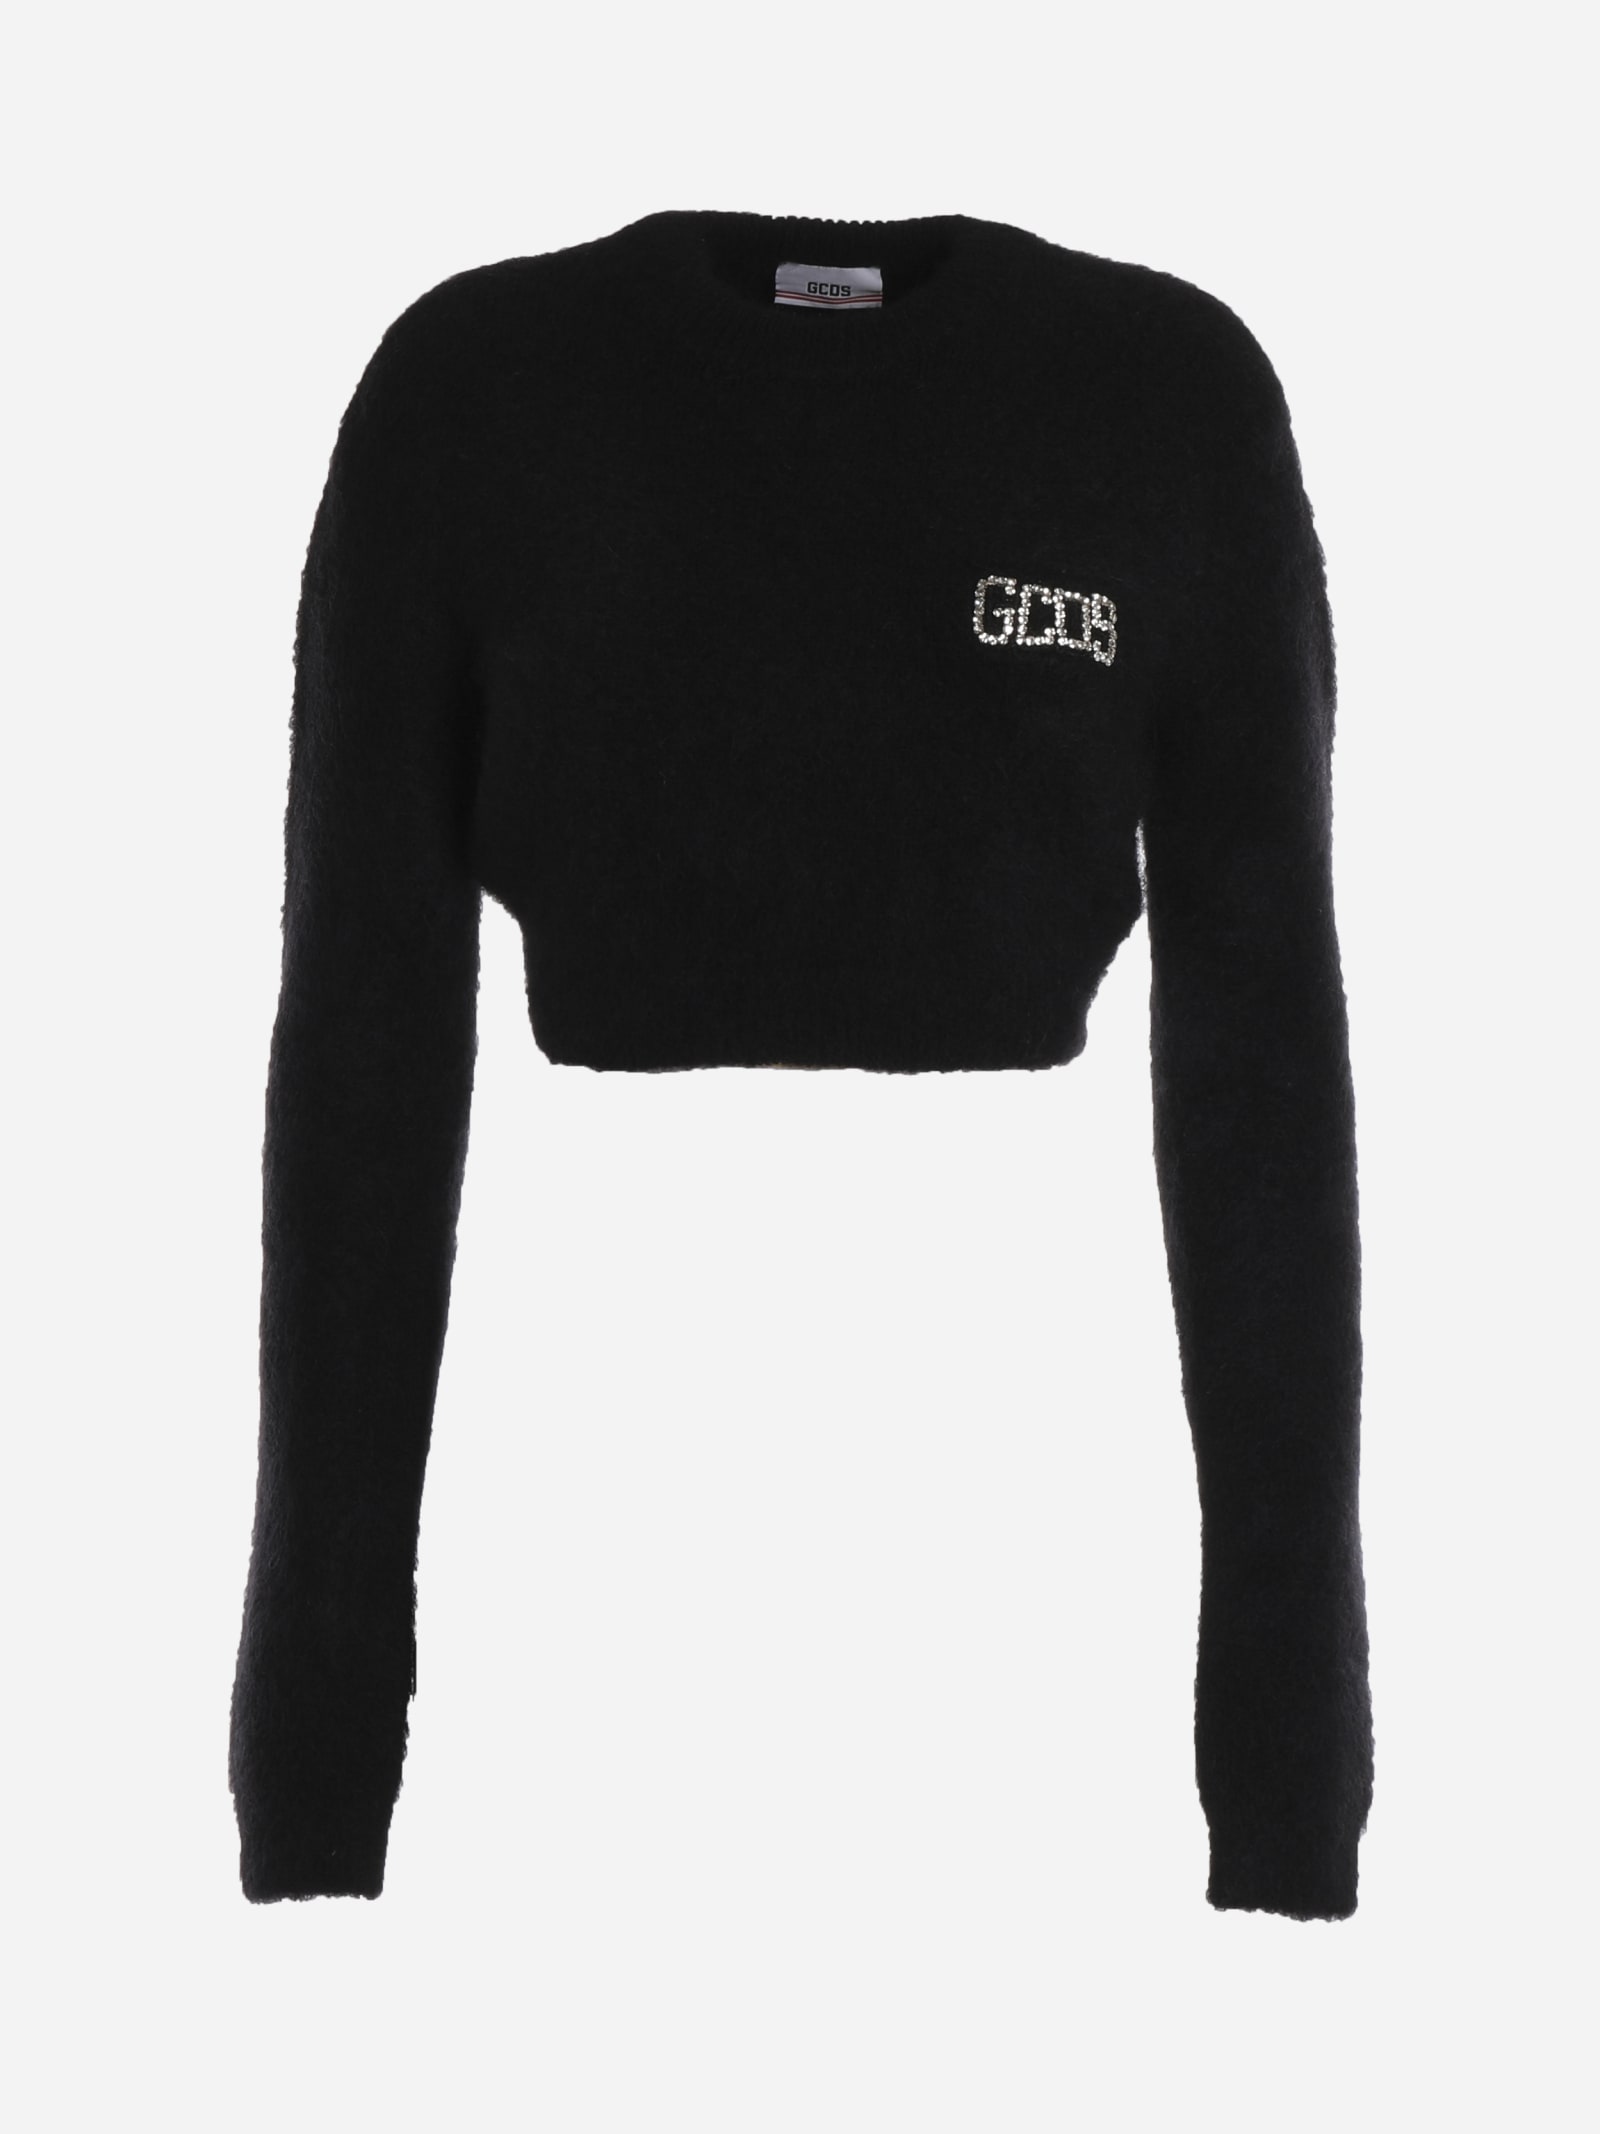 GCDS Black Cropped Pullover In Wool Blend